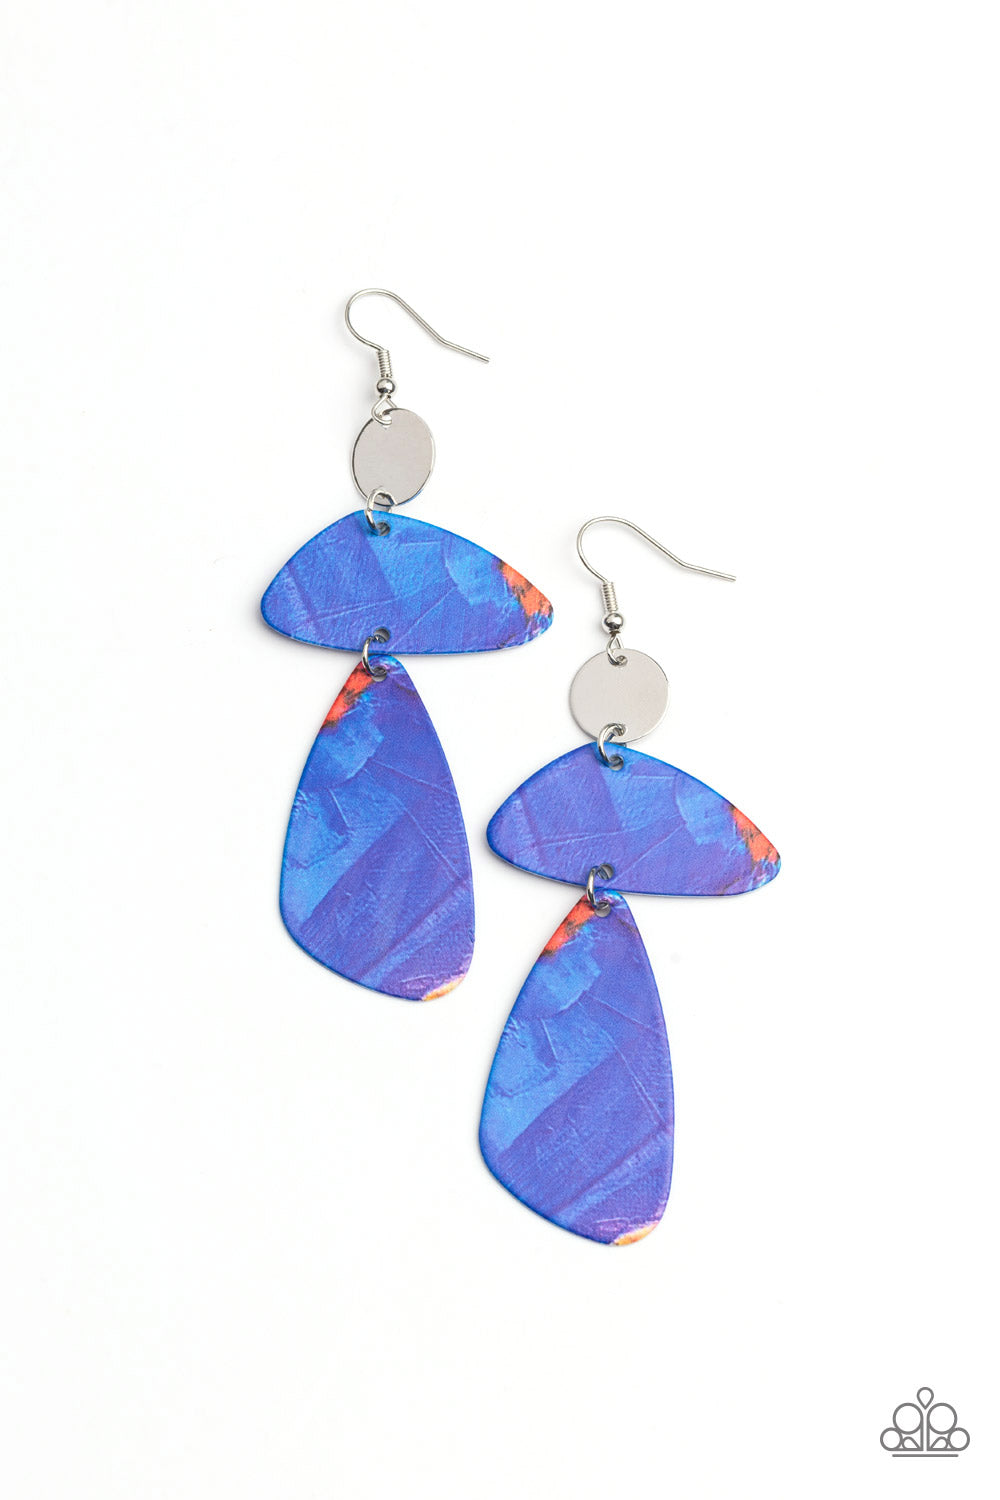 SWATCH Me Now Blue Earring - Paparazzi Accessories  Painted in abstract blue details, a pair of asymmetrical frames swing form the bottom of a dainty silver disc for an artsy look. Earring attaches to a standard fishhook fitting.  Sold as one pair of earrings.